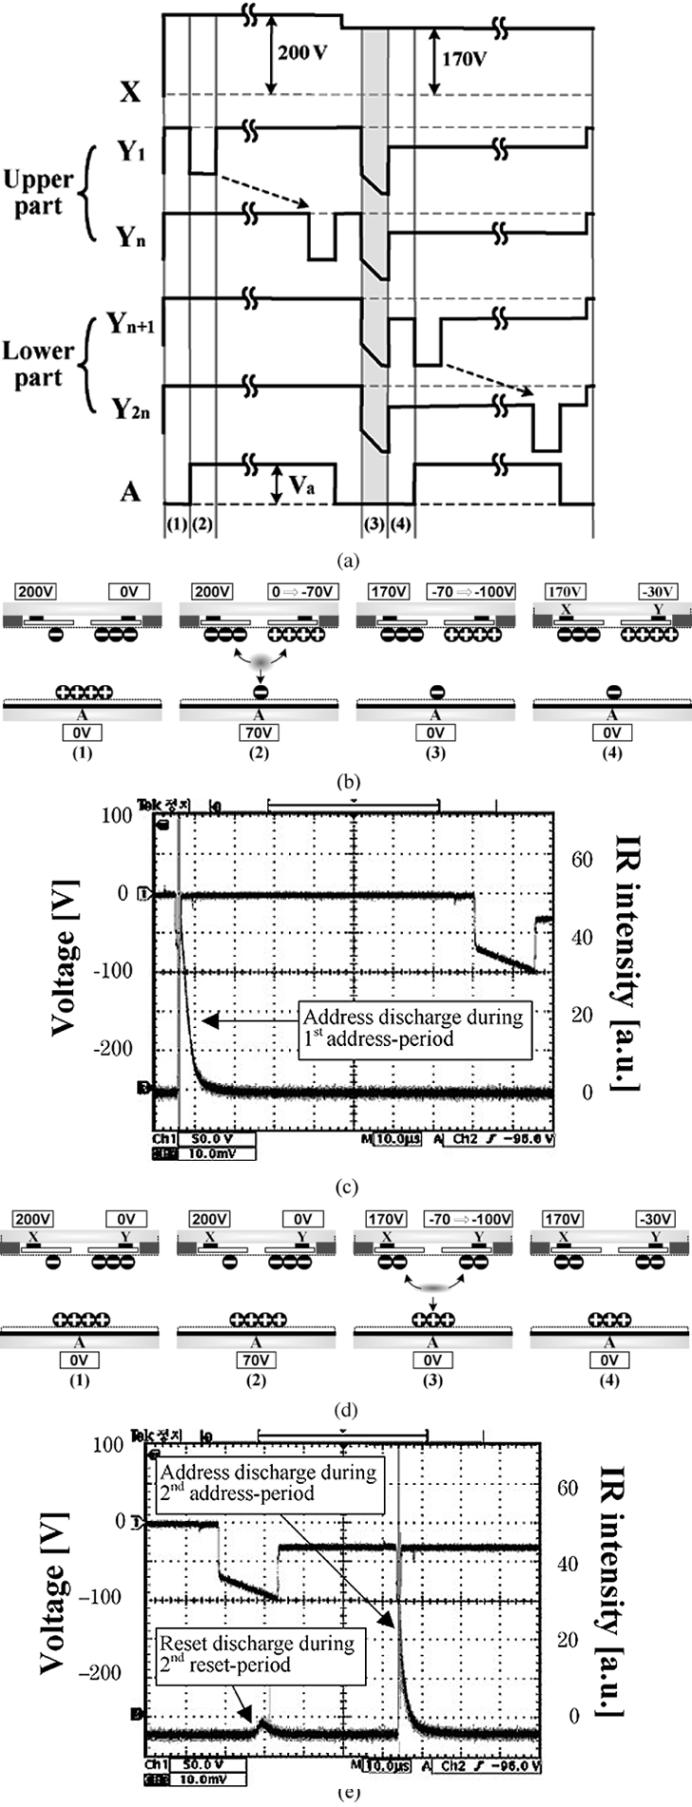 2362 IEEE TRANSACTIONS ON ELECTRON DEVICES, VOL. 52, NO. 11, NOVEMBER 2005 Fig. 11. IR (828 nm) emission waveforms during (a) conventional reset period in Fig.